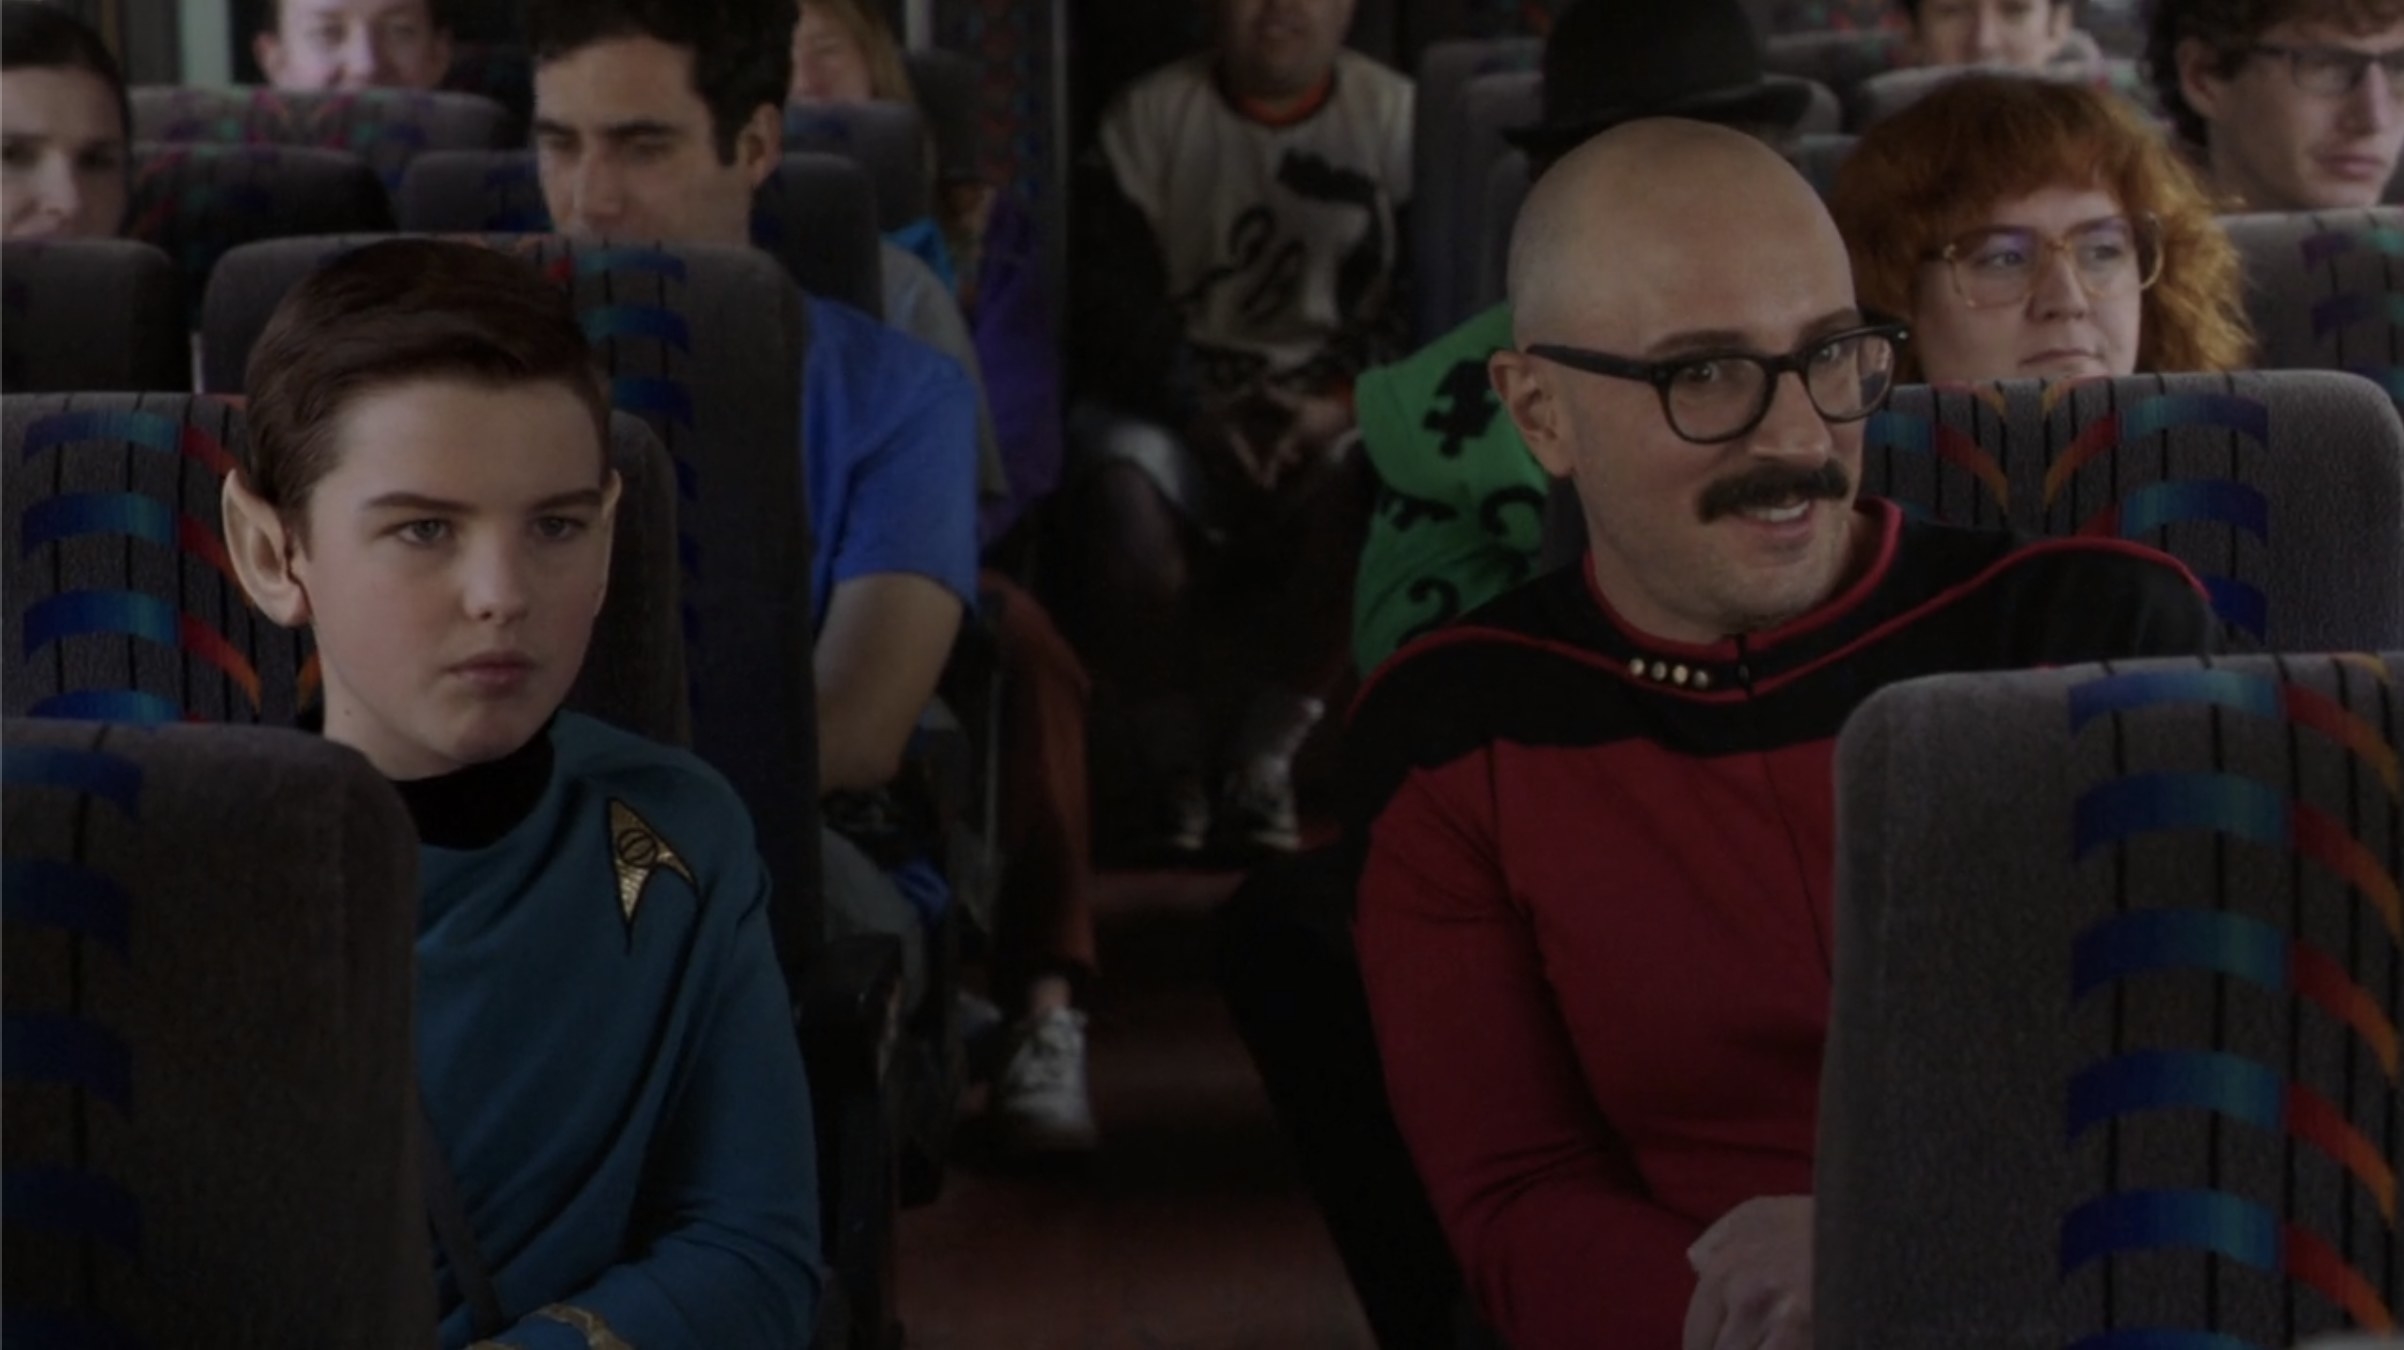 iain armitage and steve burns on a bus dressed as star trek characters on young sheldon